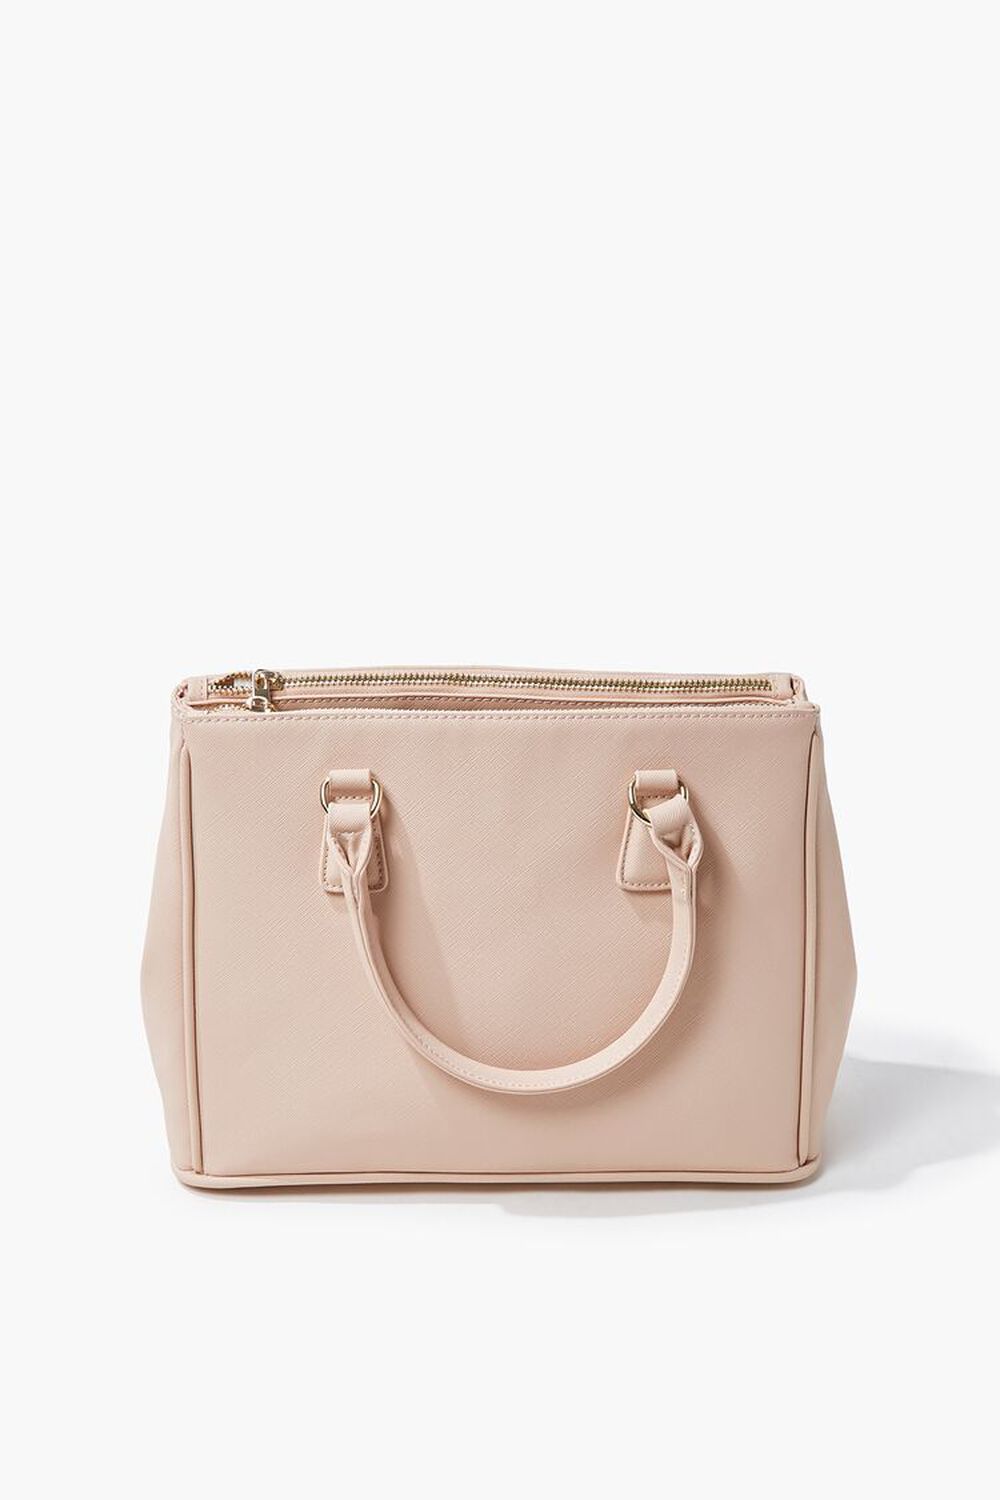 TAUPE Structured Square Satchel, image 1